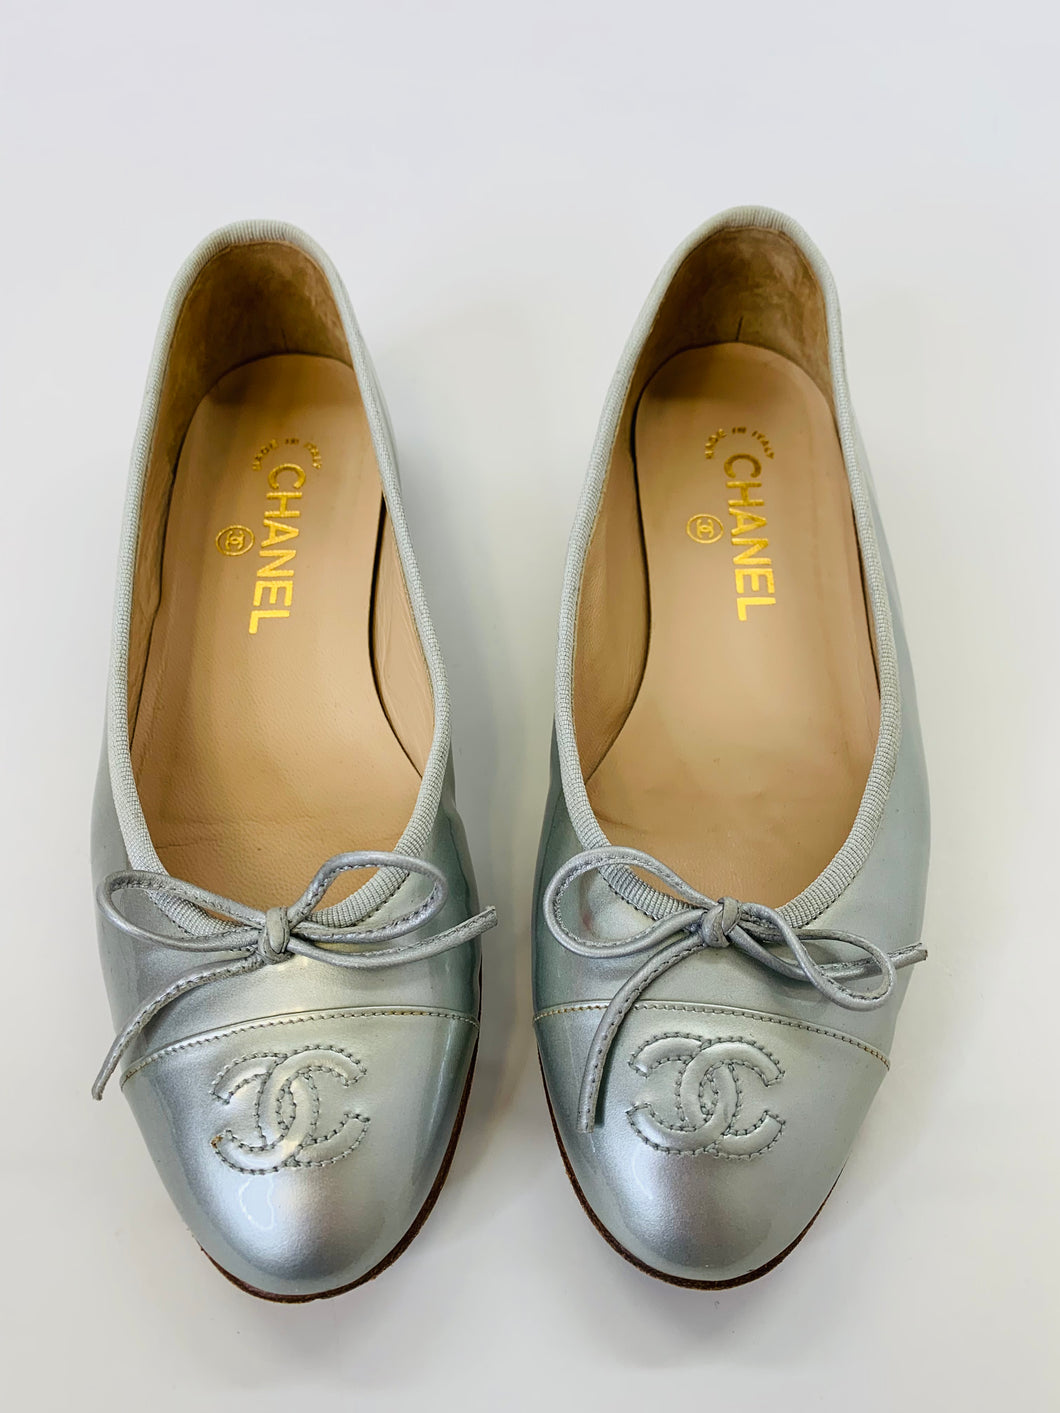 CHANEL Grey Patent Leather Ballerina Flats Size 37